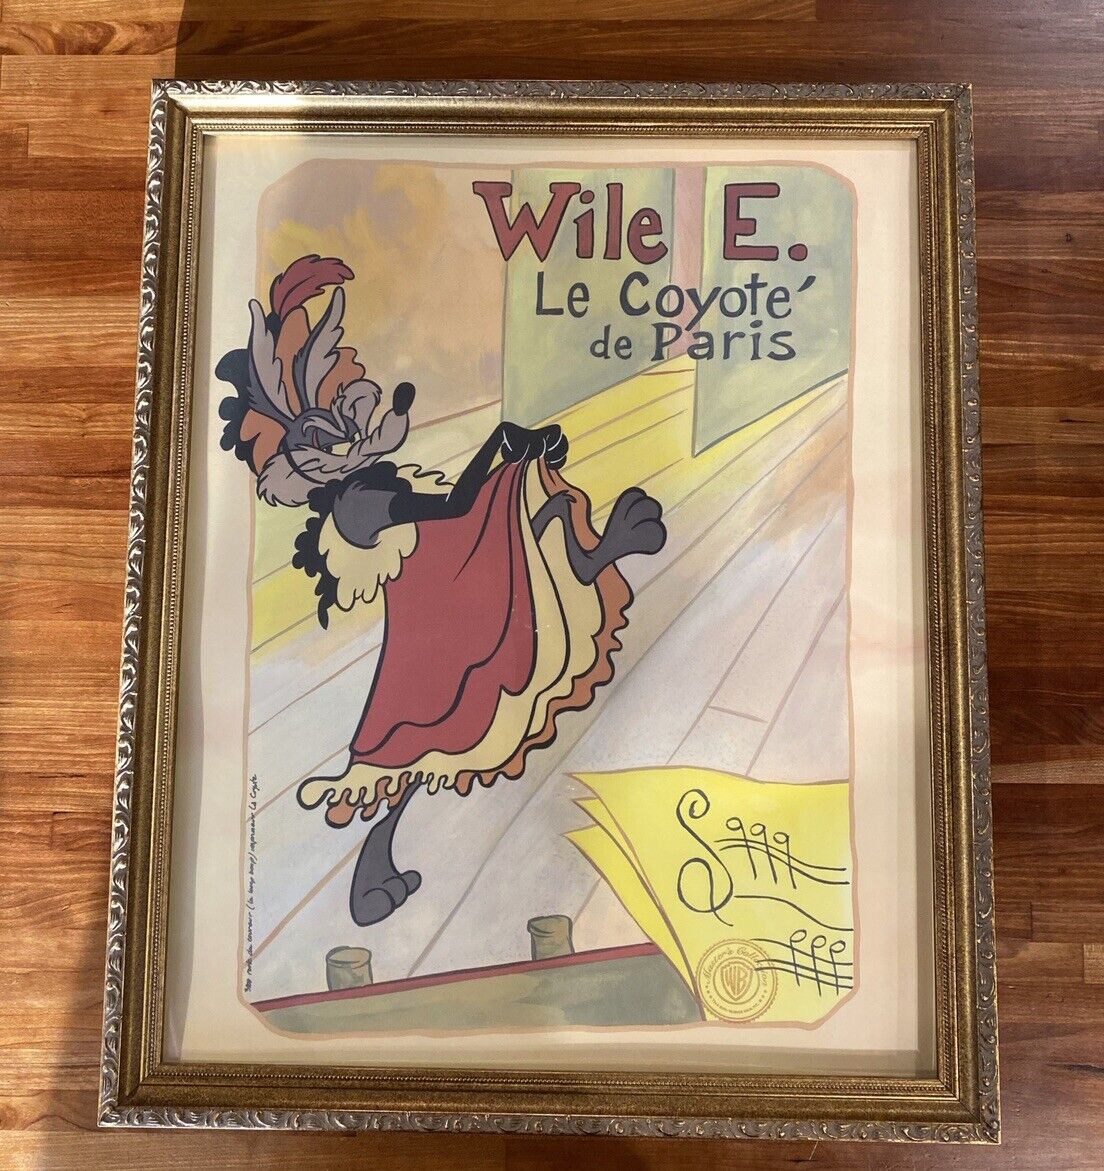 Warner Brothers Looney Tunes Wile E Coyote Gallery Framed Print 16x20